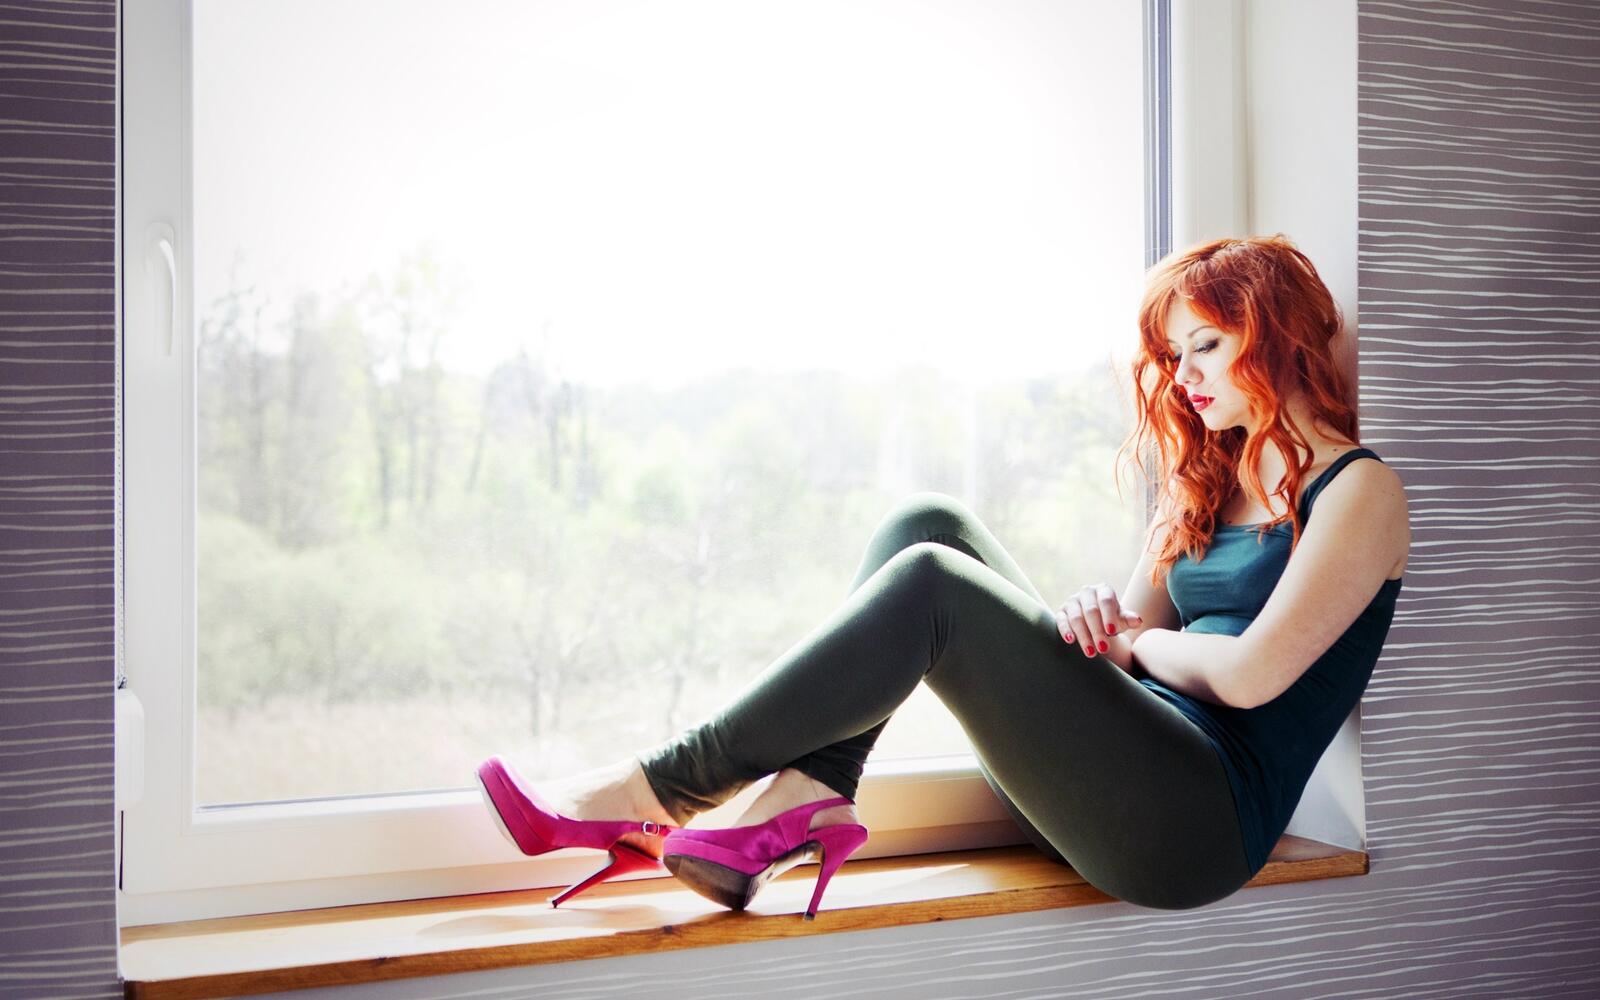 Wallpapers redheads shoes window sill on the desktop